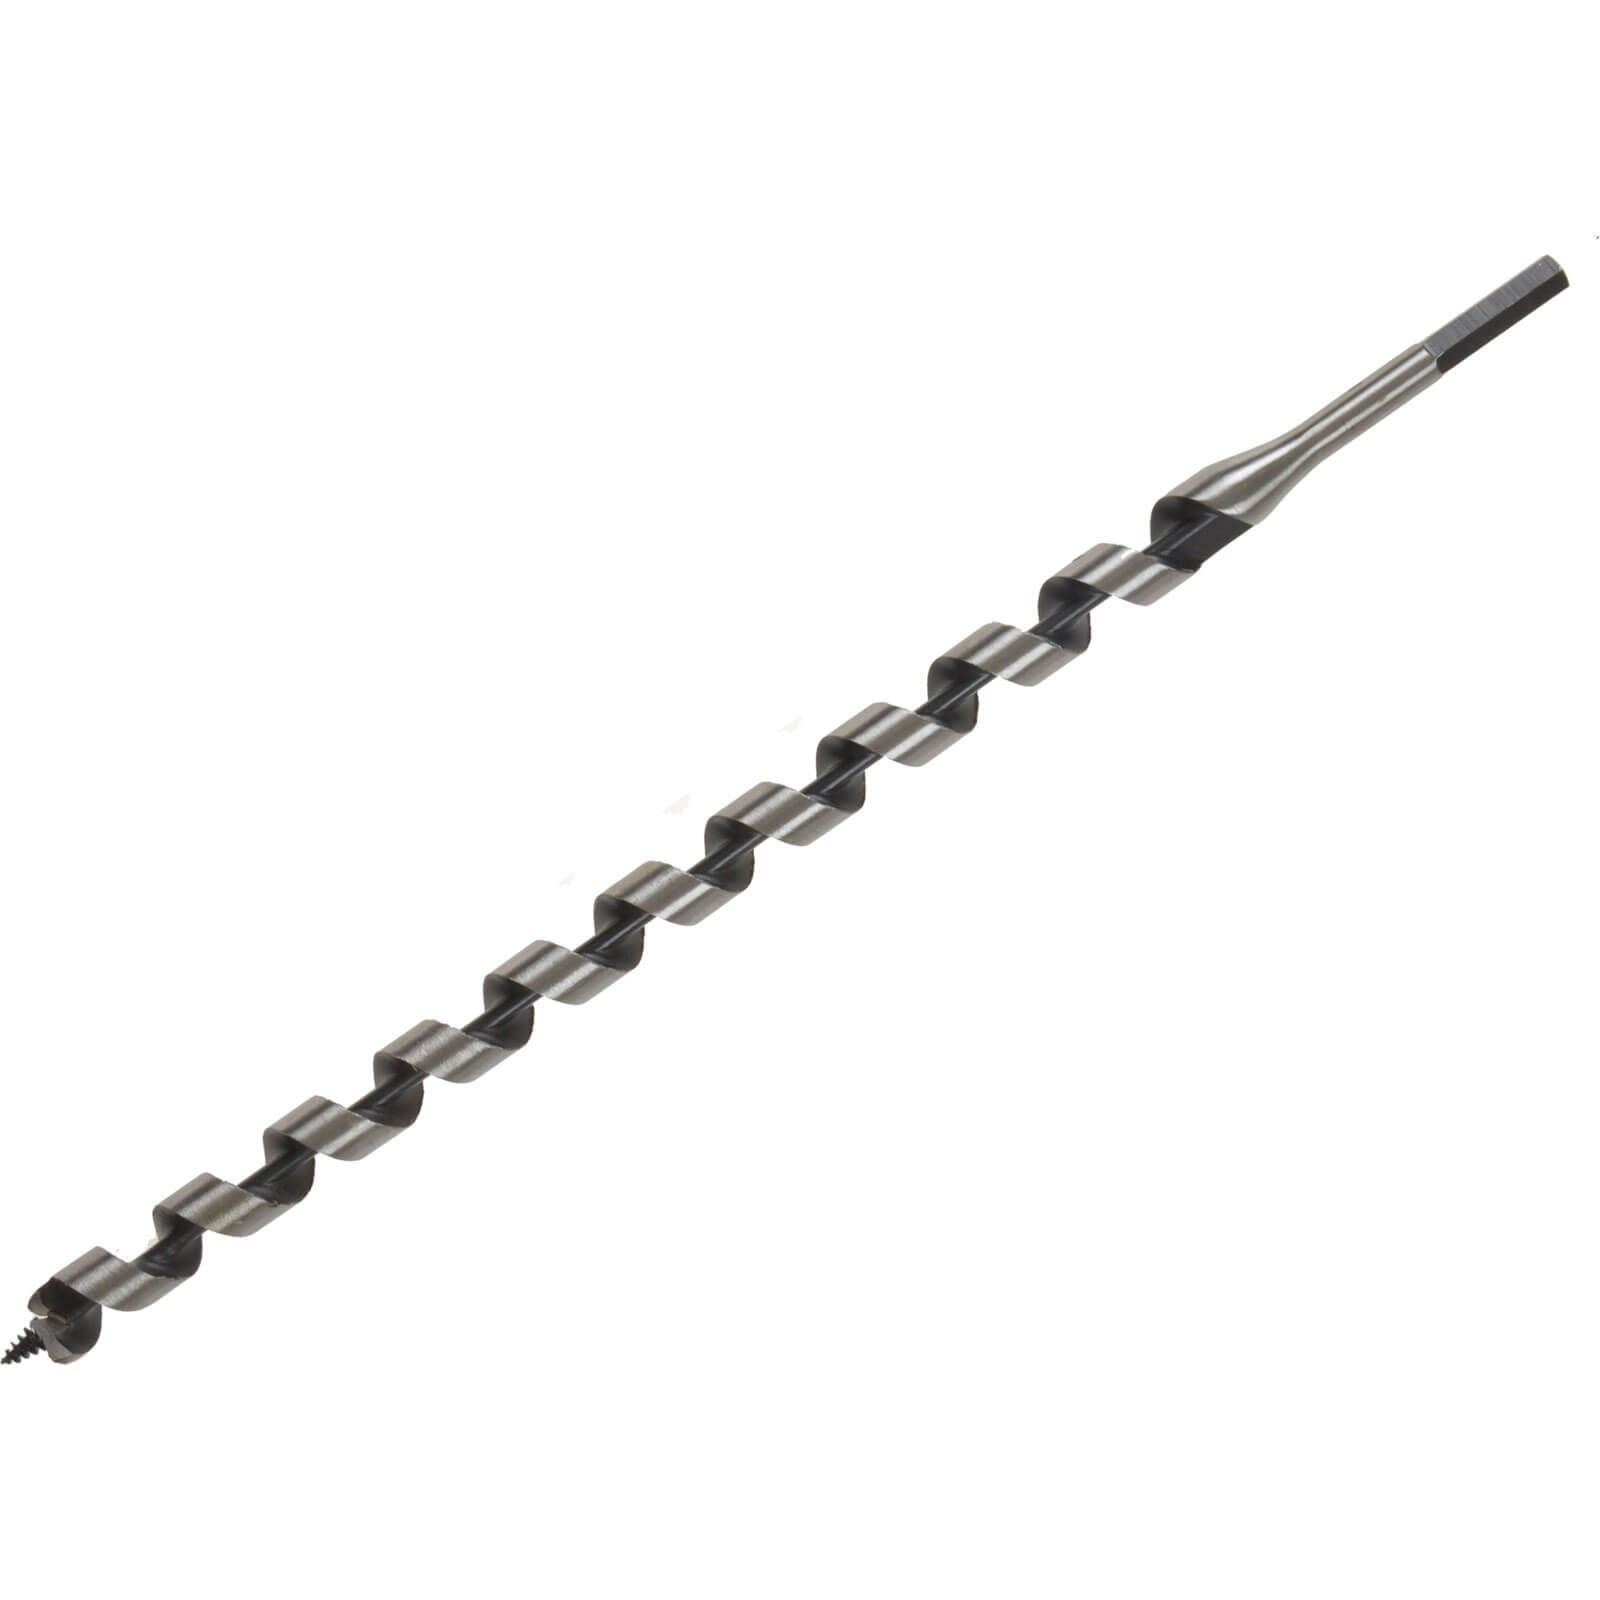 Image of Irwin Wood Auger Drill Bit 6mm 400mm